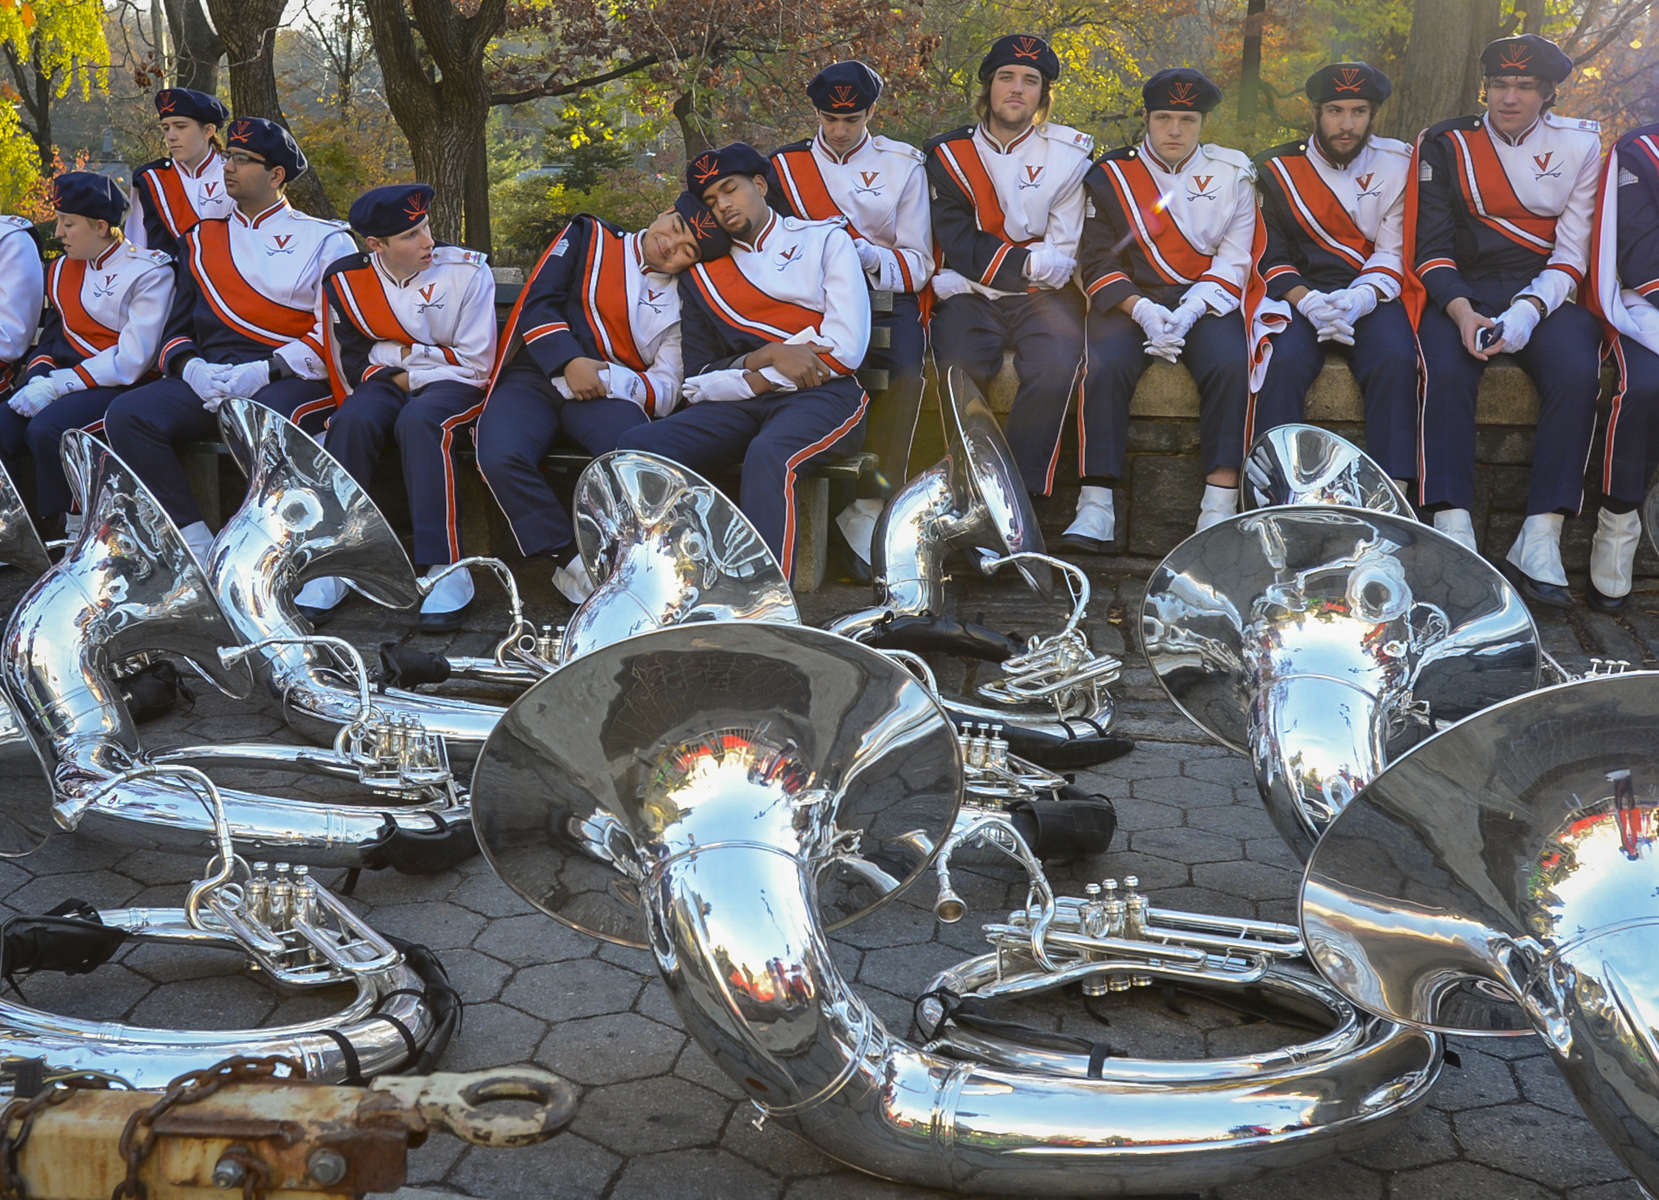 University of Virginia Marching Band members takes a rest along Central Park West during the Annual Macy's Thanksgiving Day Parade in Manhattan on Thursday, November 26, 2015.